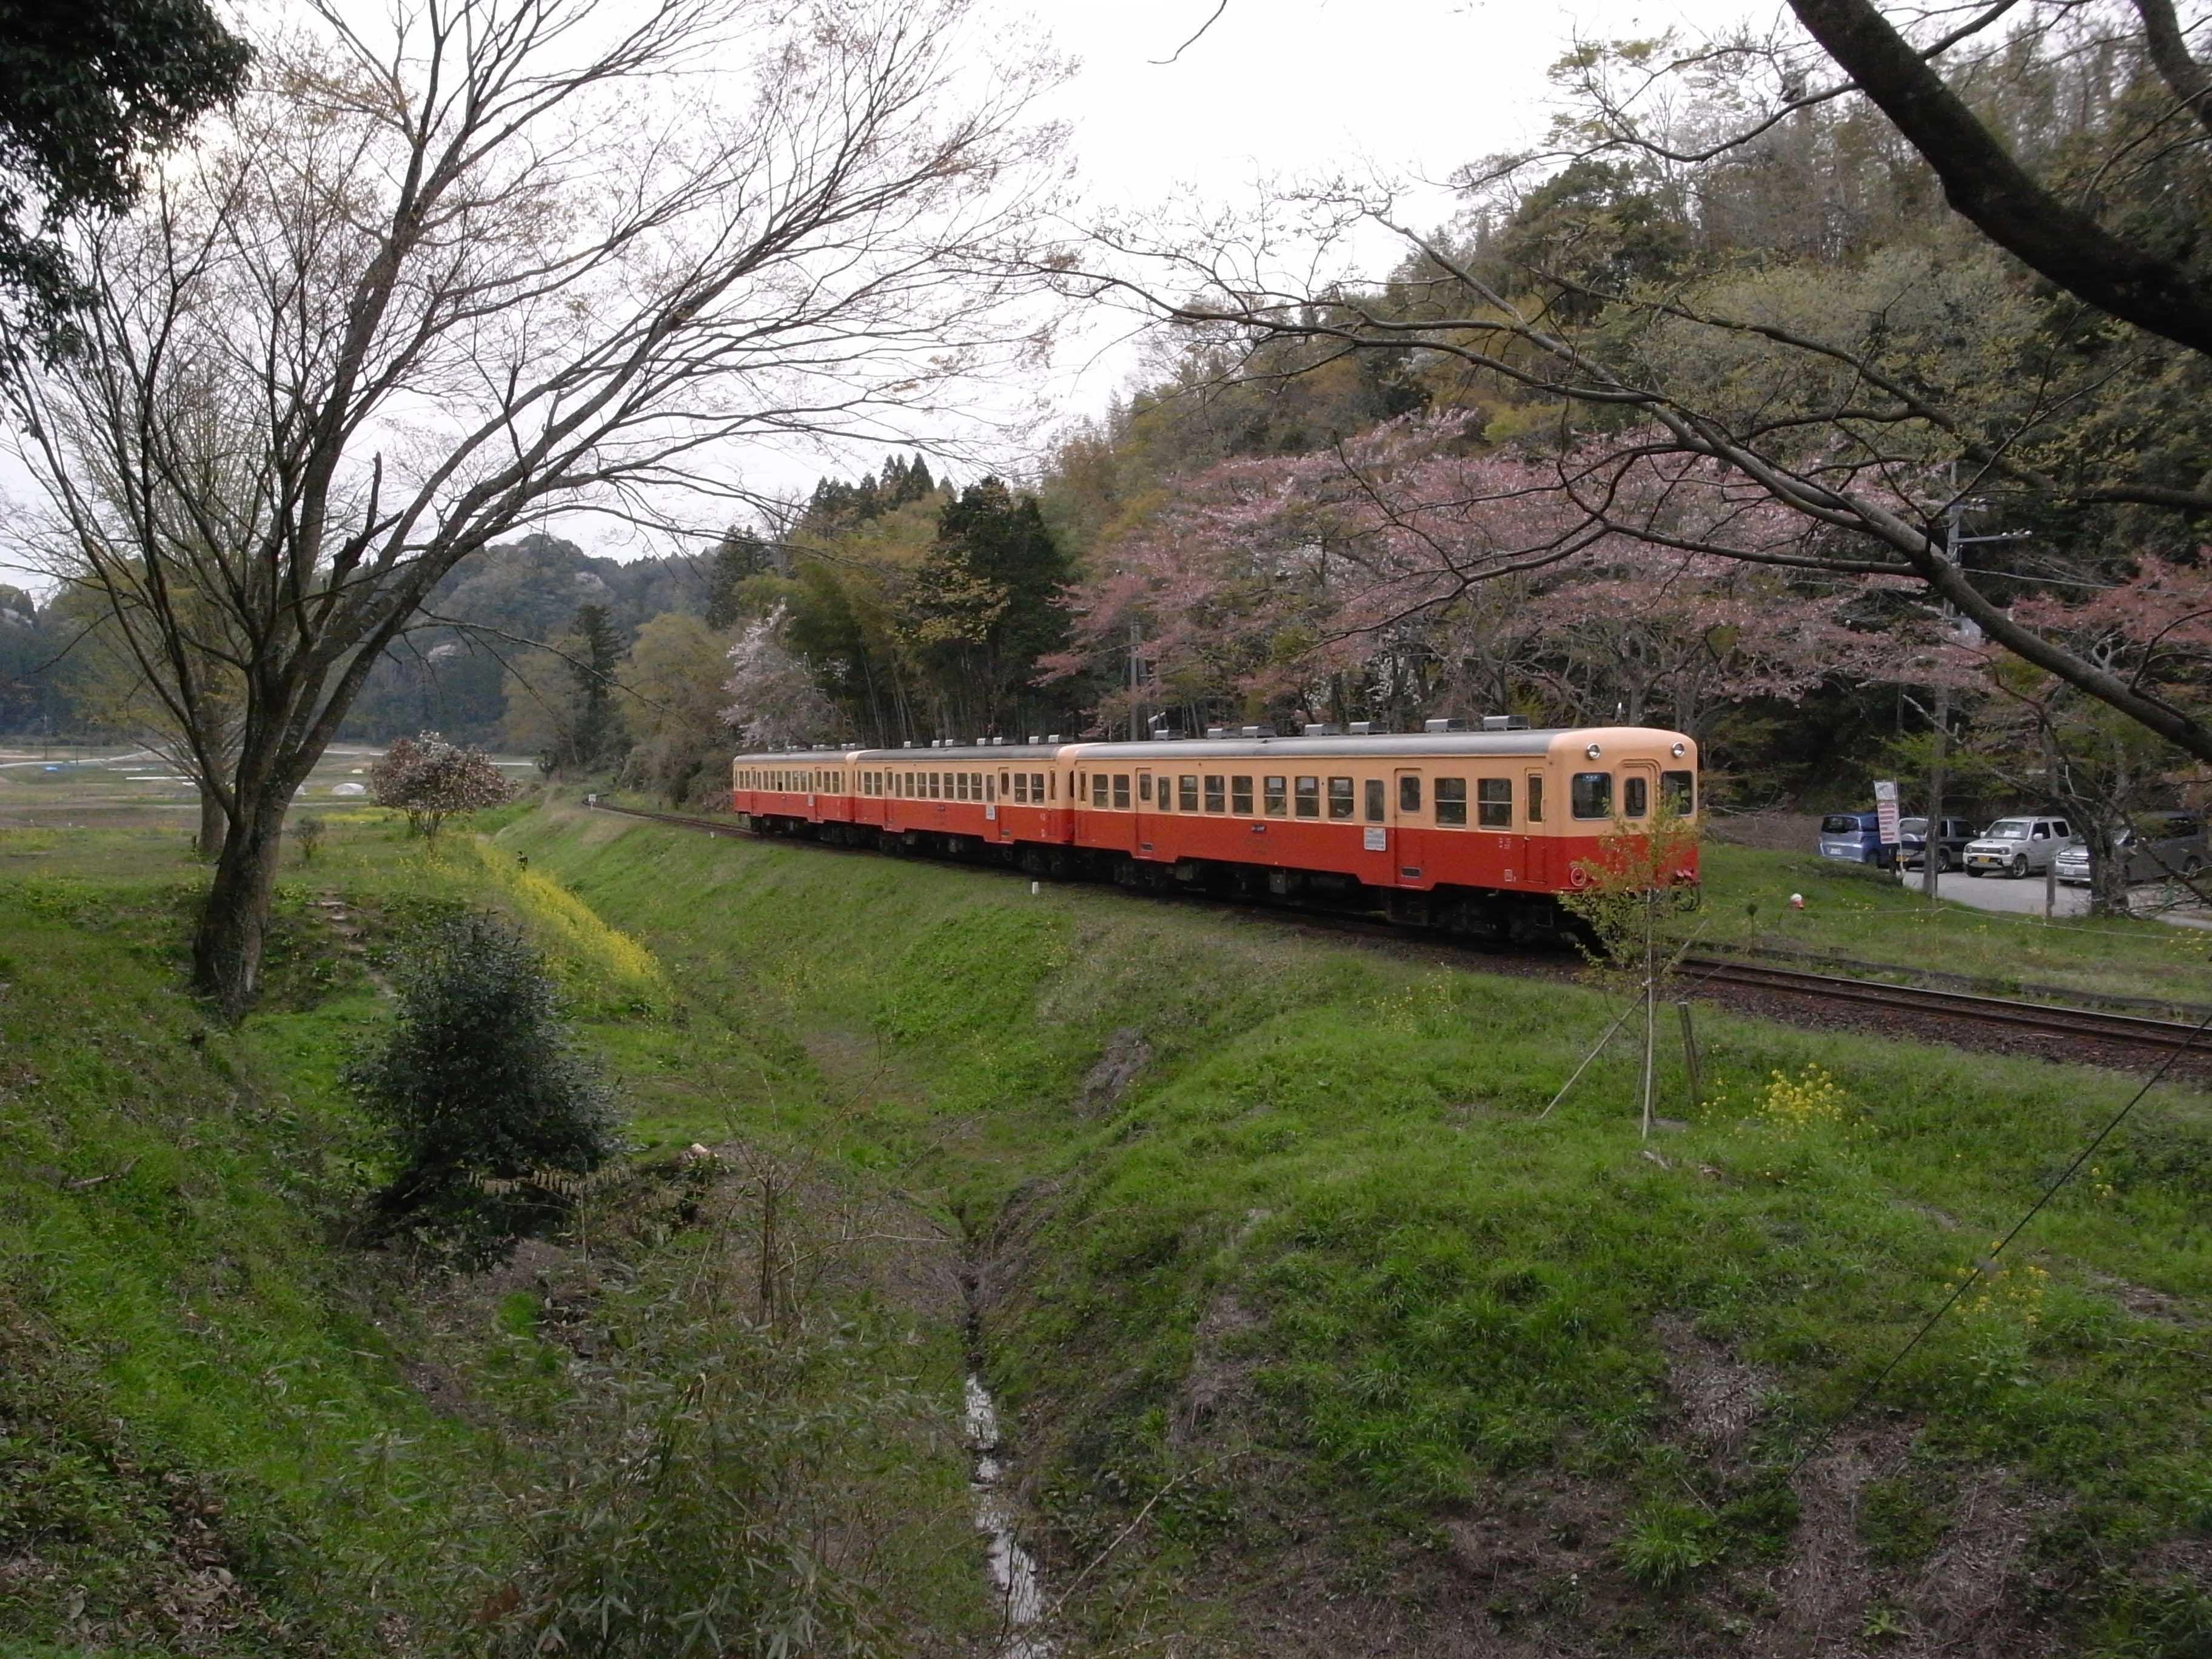 Track record: 'But I was so in love: Heavenly Hotel II' by the Yubiwa Hotel group takes place aboard a train on the scenic Kominato Railway, part of the 'Ichihara Art×Mix' festival, on the Boso Peninsula, Chiba Prefecture | JAMES JACK